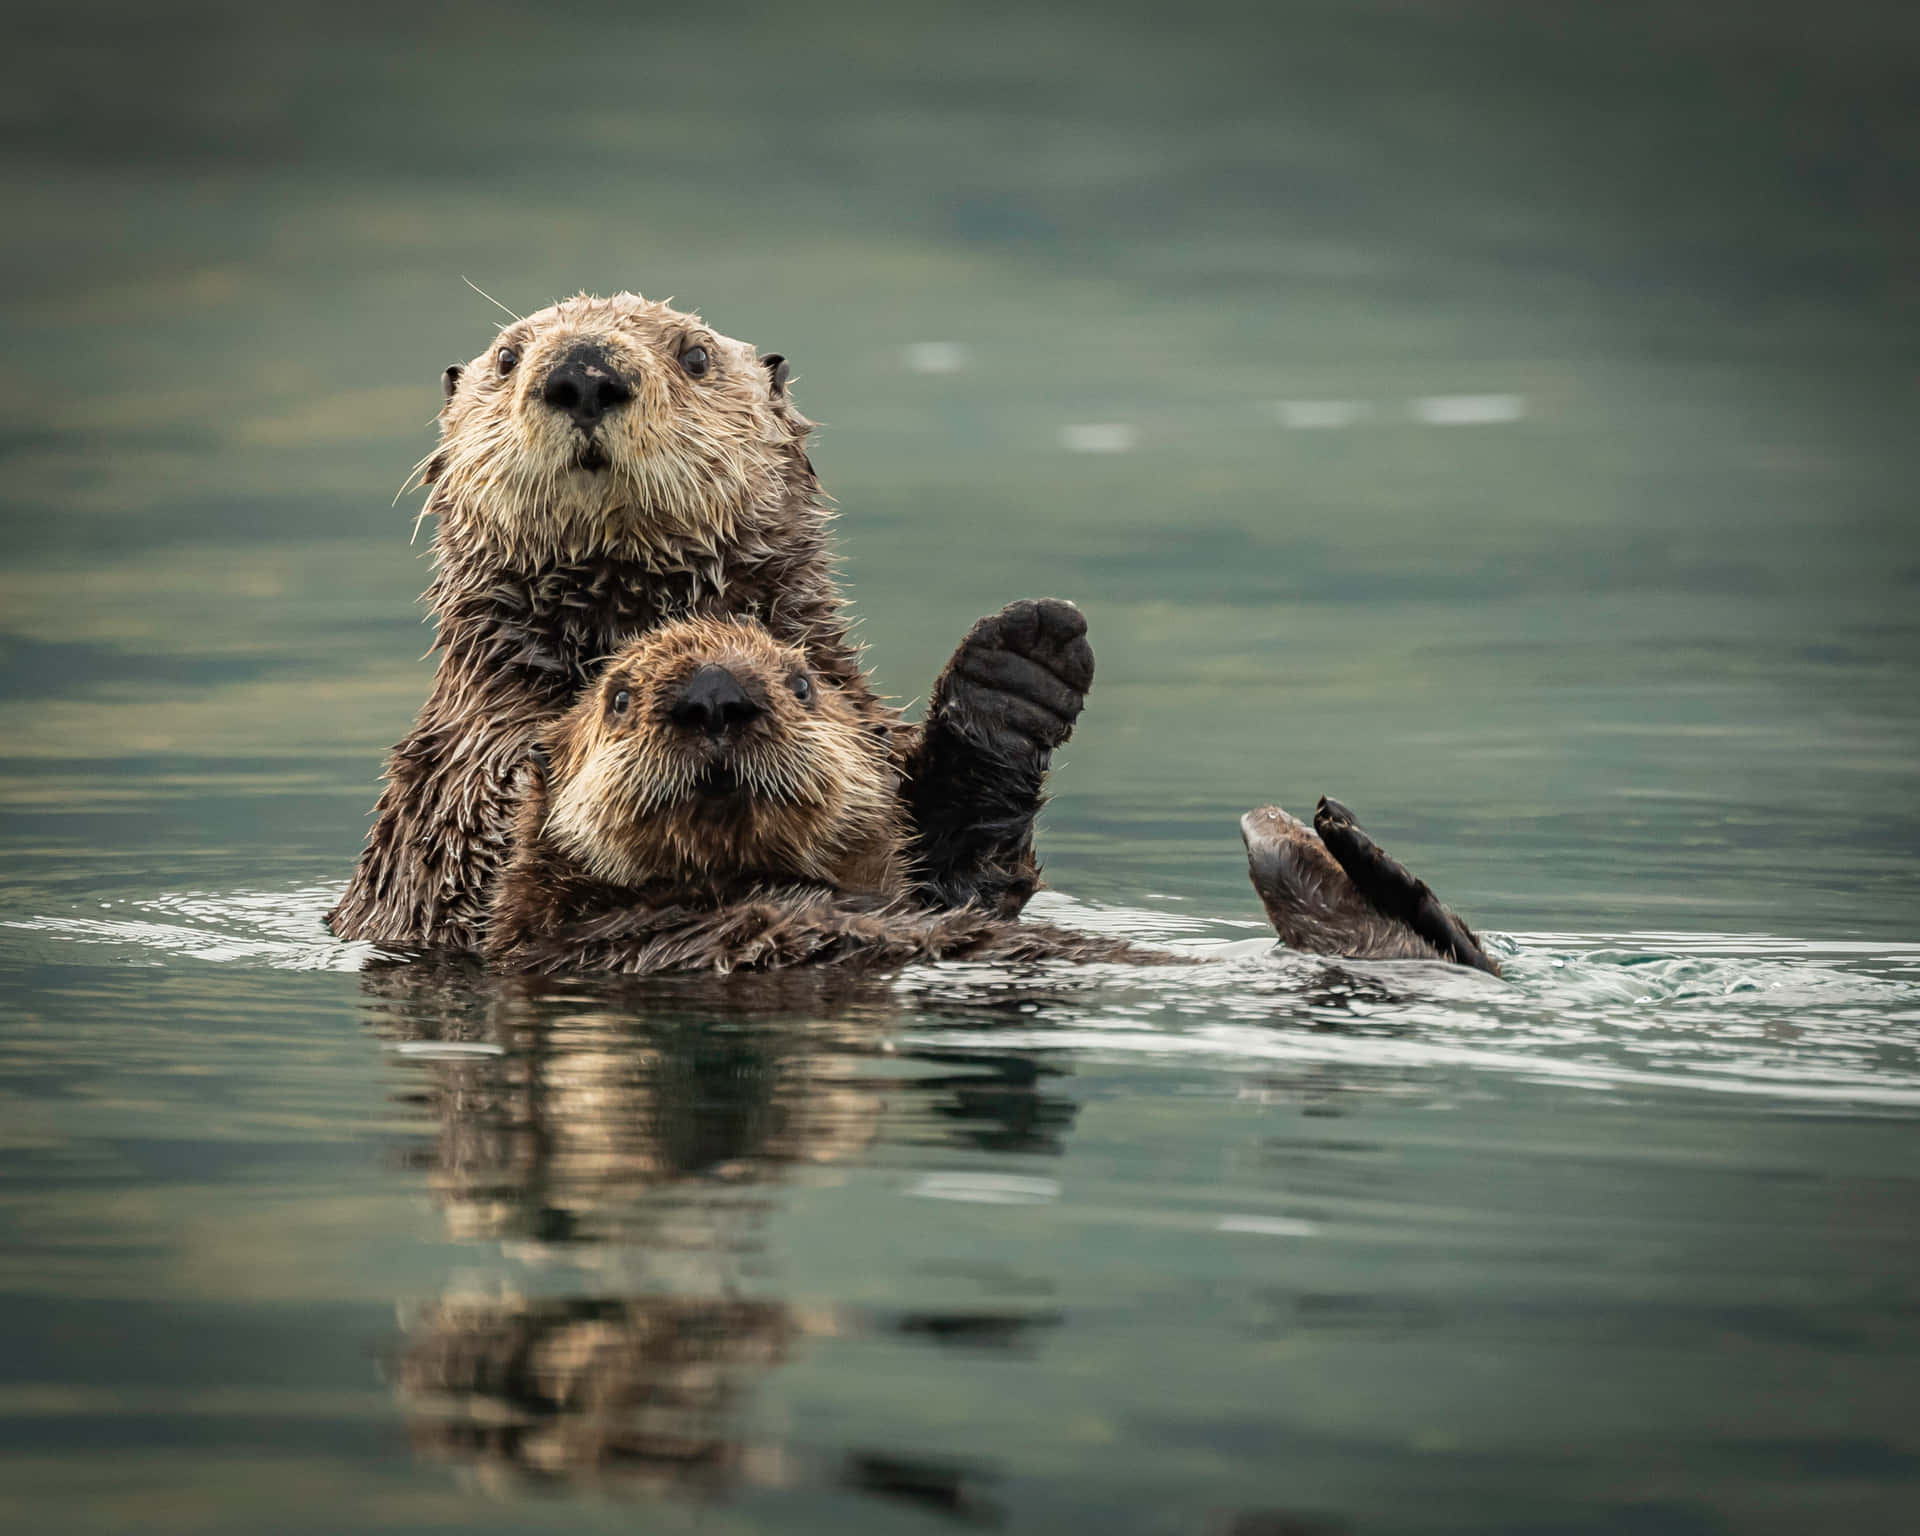 A Playful Sea Otter Waving From The Waters